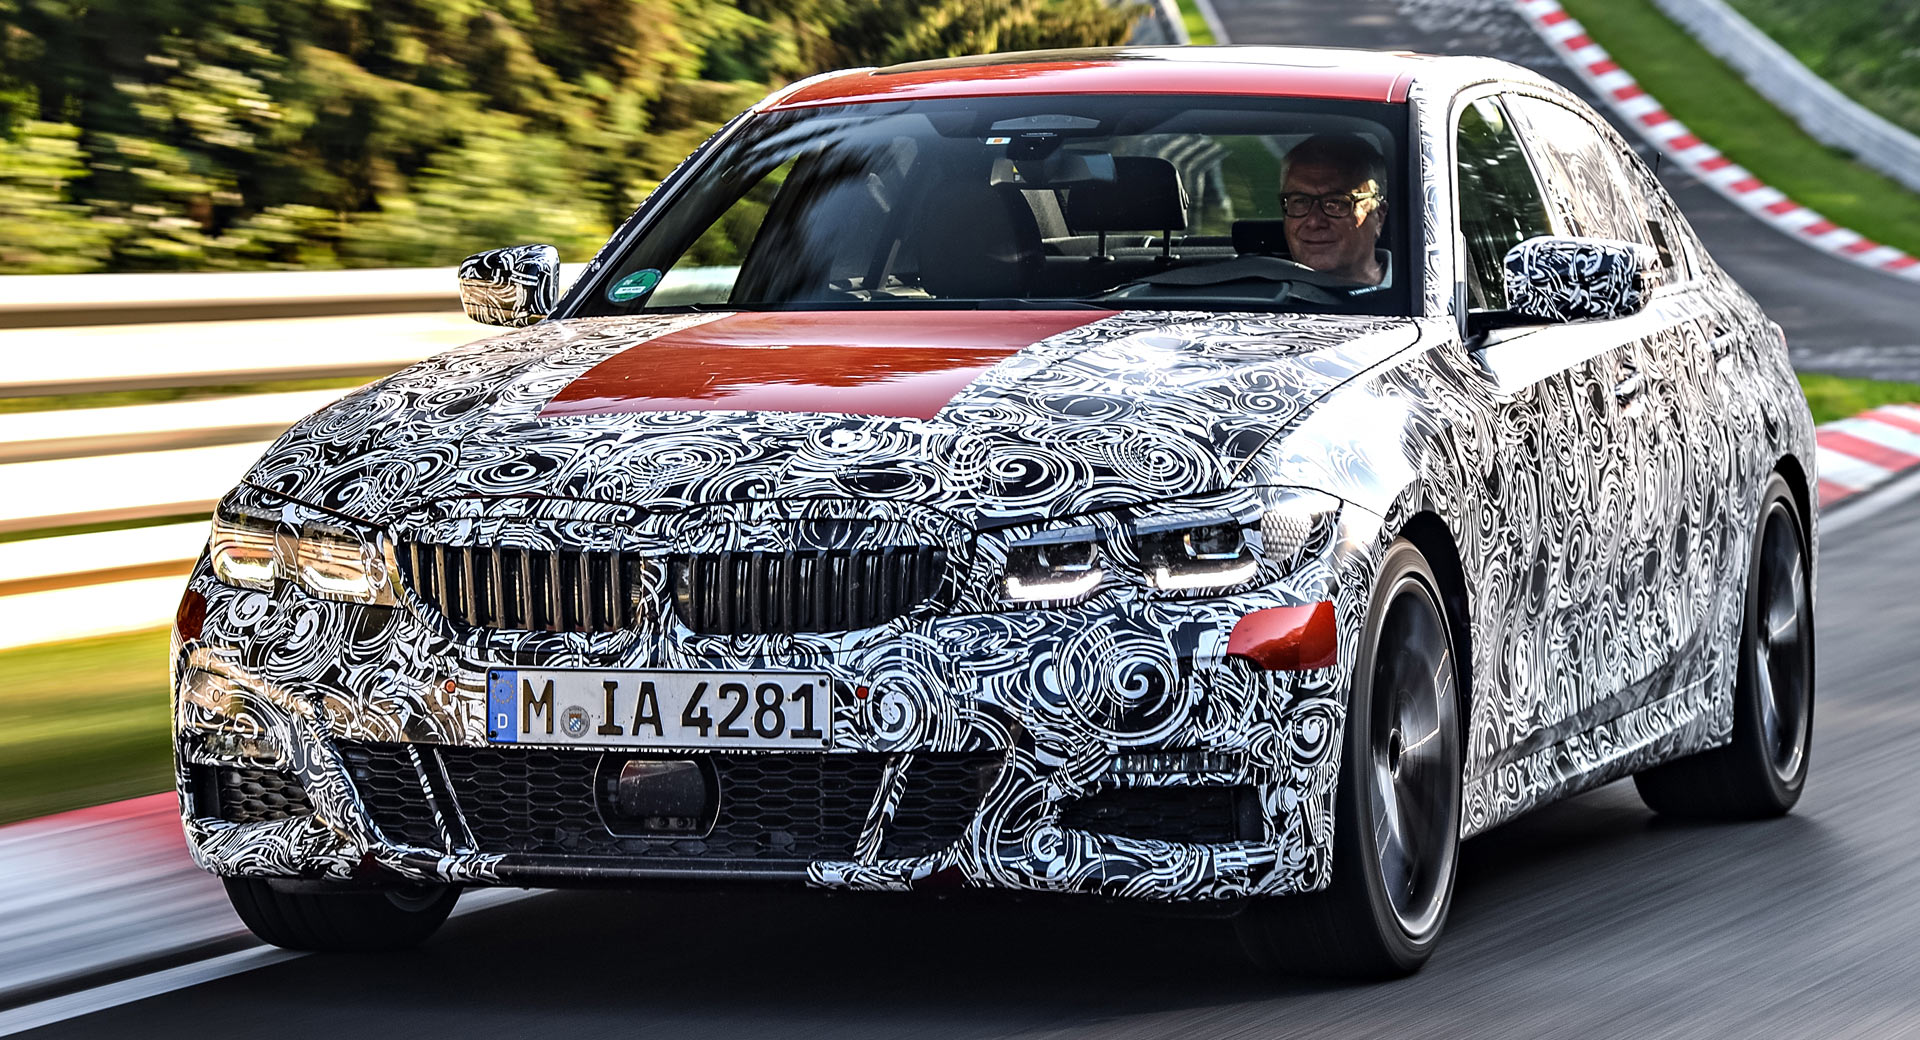 2019 BMW 3-series Revealed – Promises to Be Better to Drive